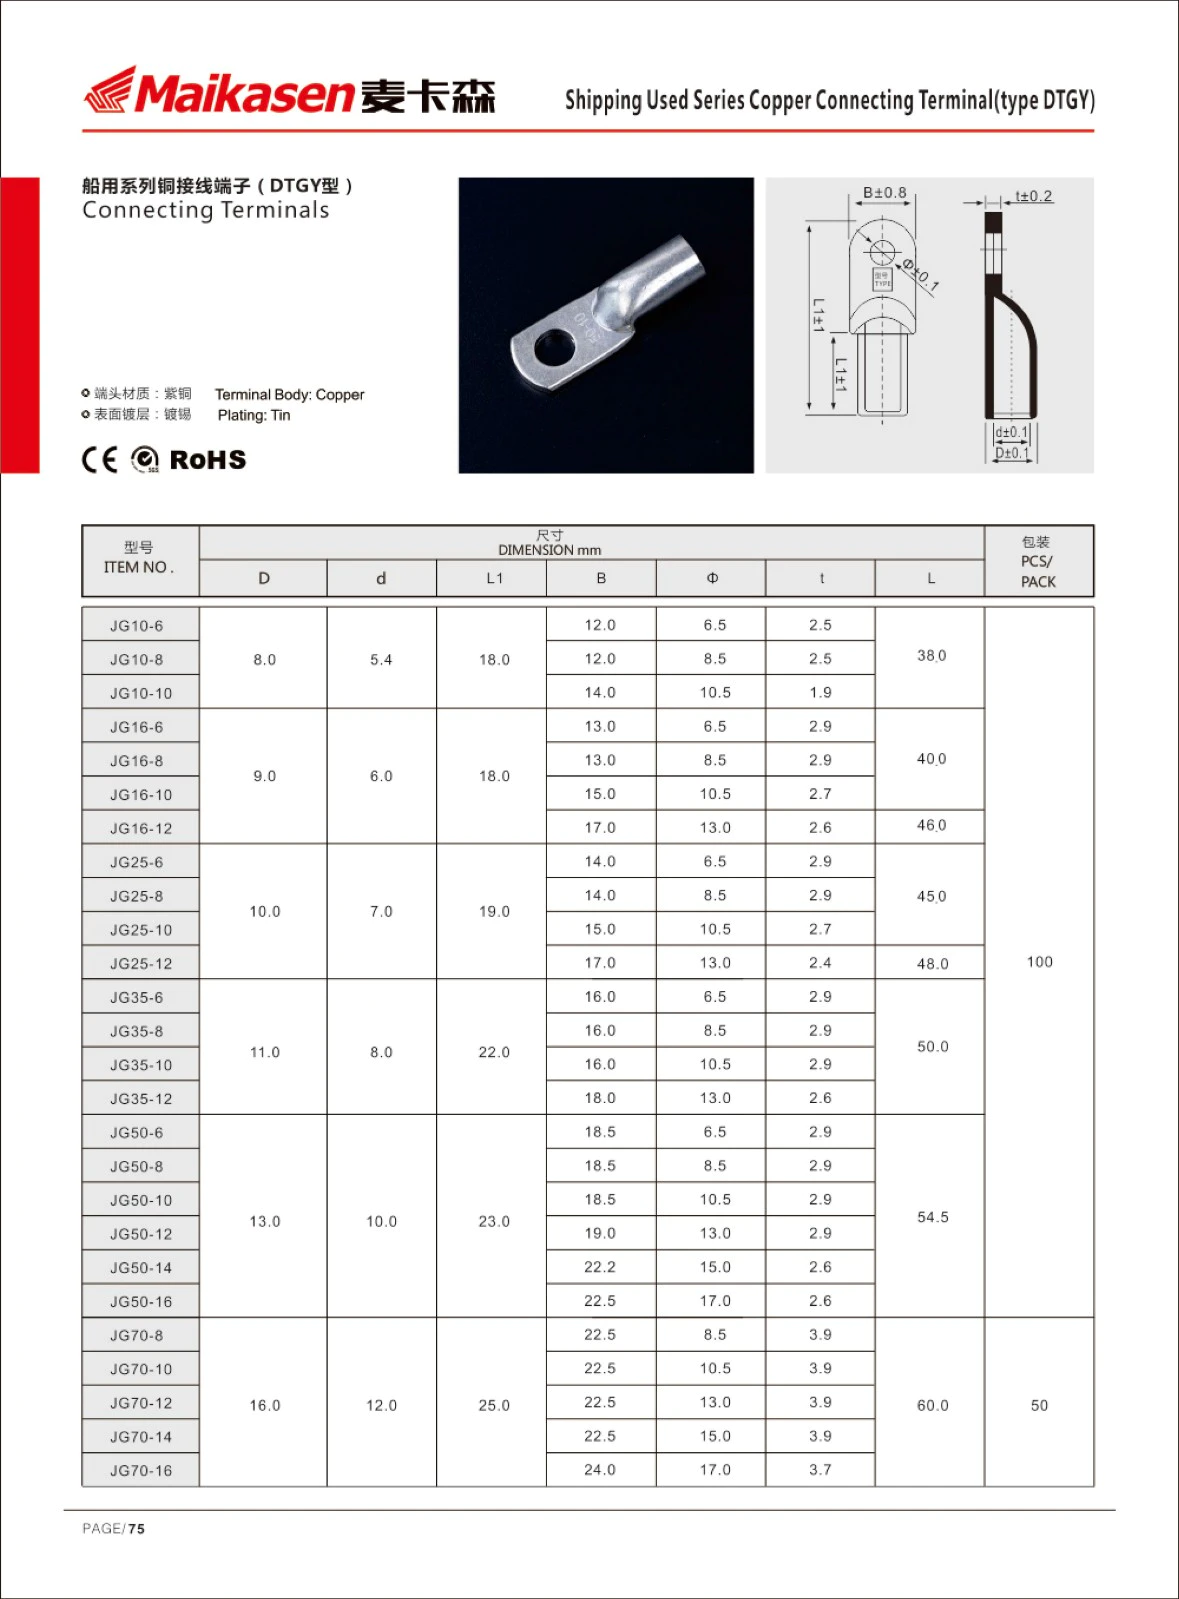 durable battery terminals wholesale for electric machinery